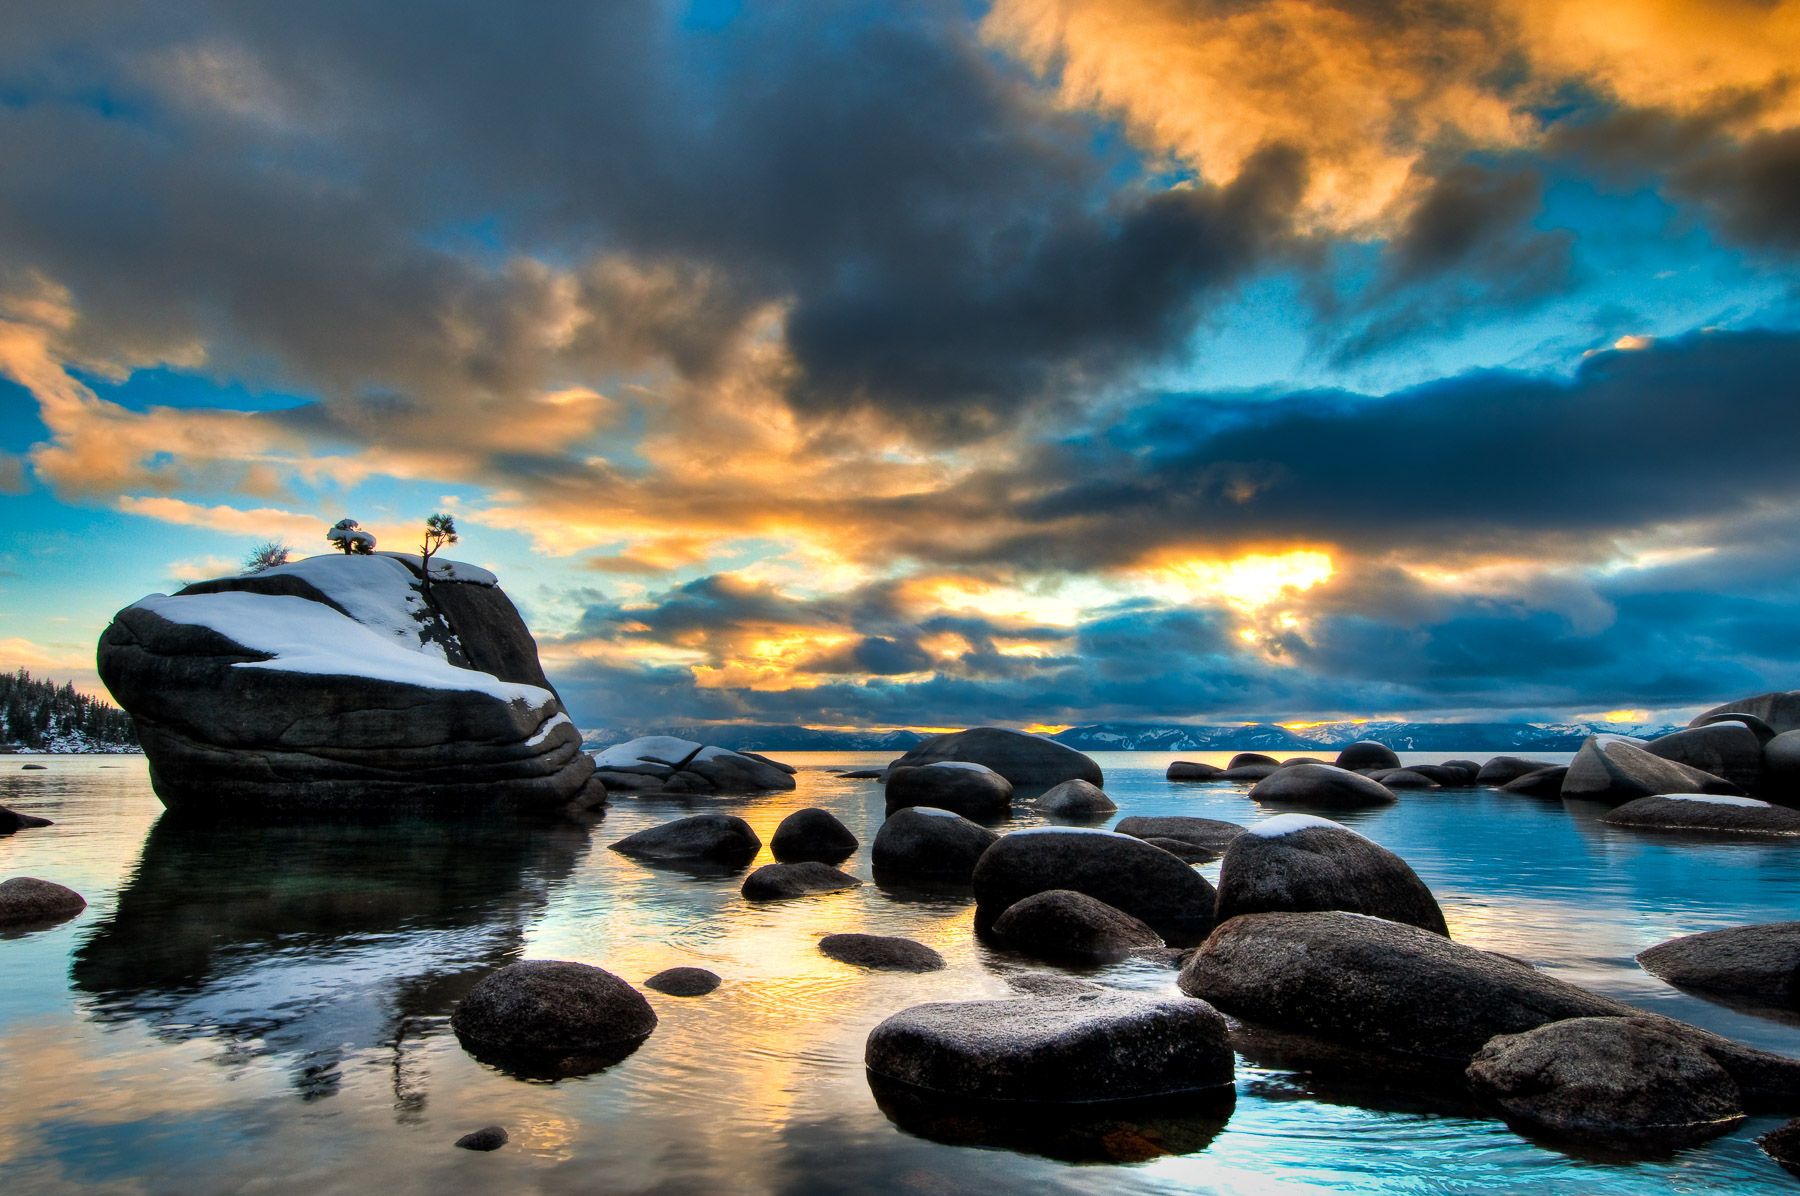 Stormy Sunset over Lake Tahoe and Bonsai Rock